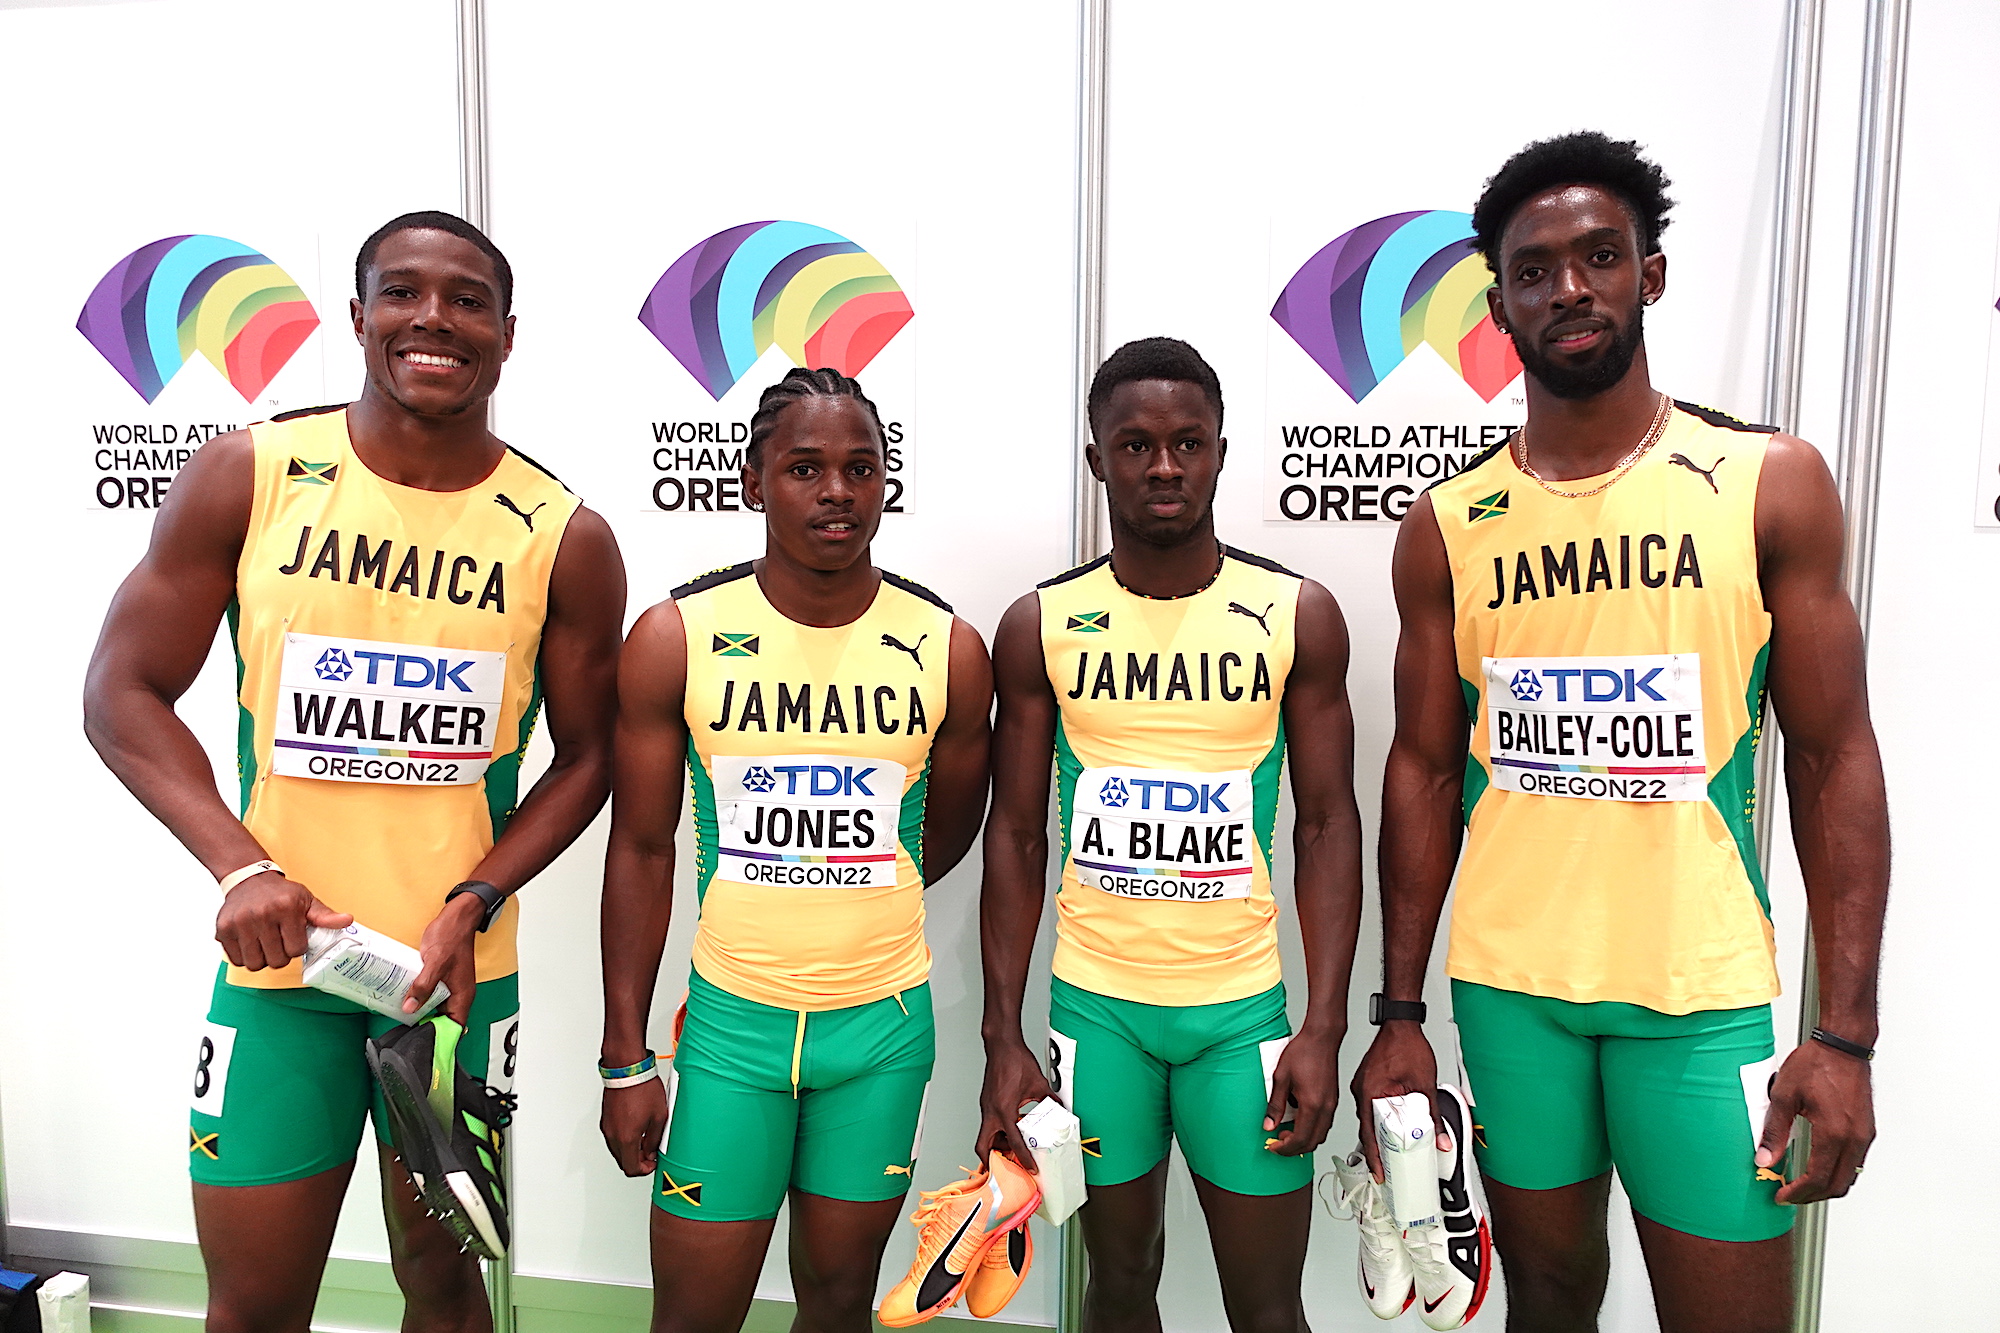 Jamaica's 4x100m team from the heats of the Oregon22 World Athletics Championships